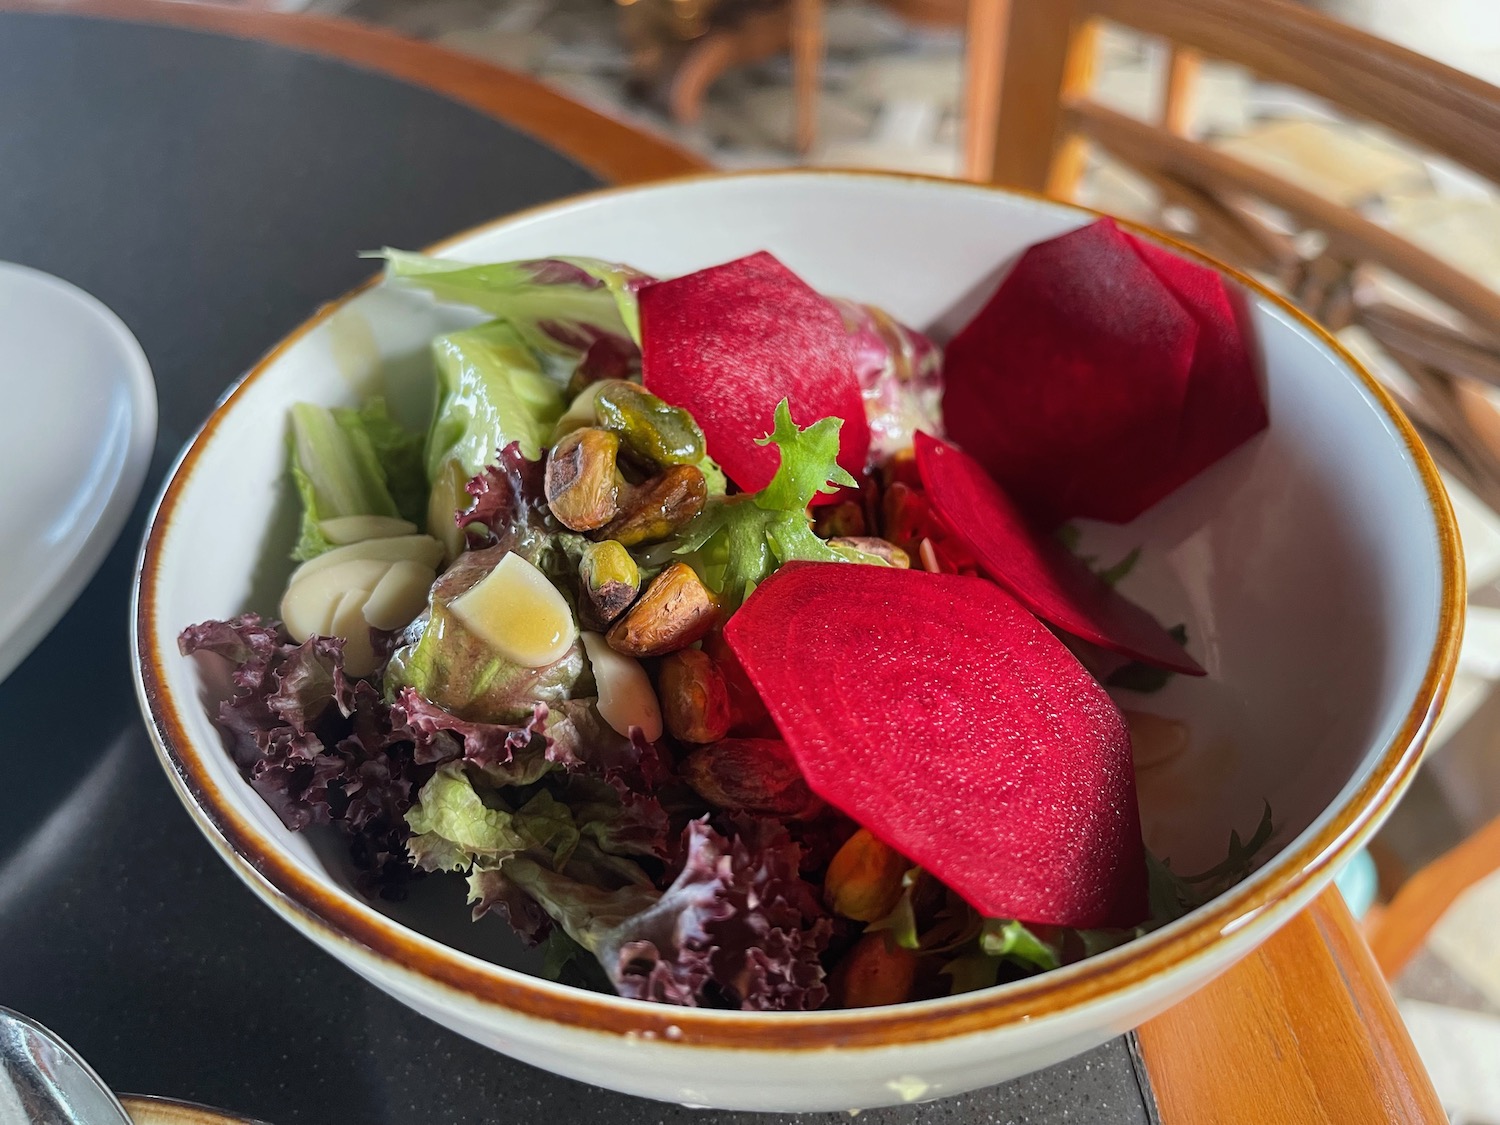 a bowl of salad with beets and nuts